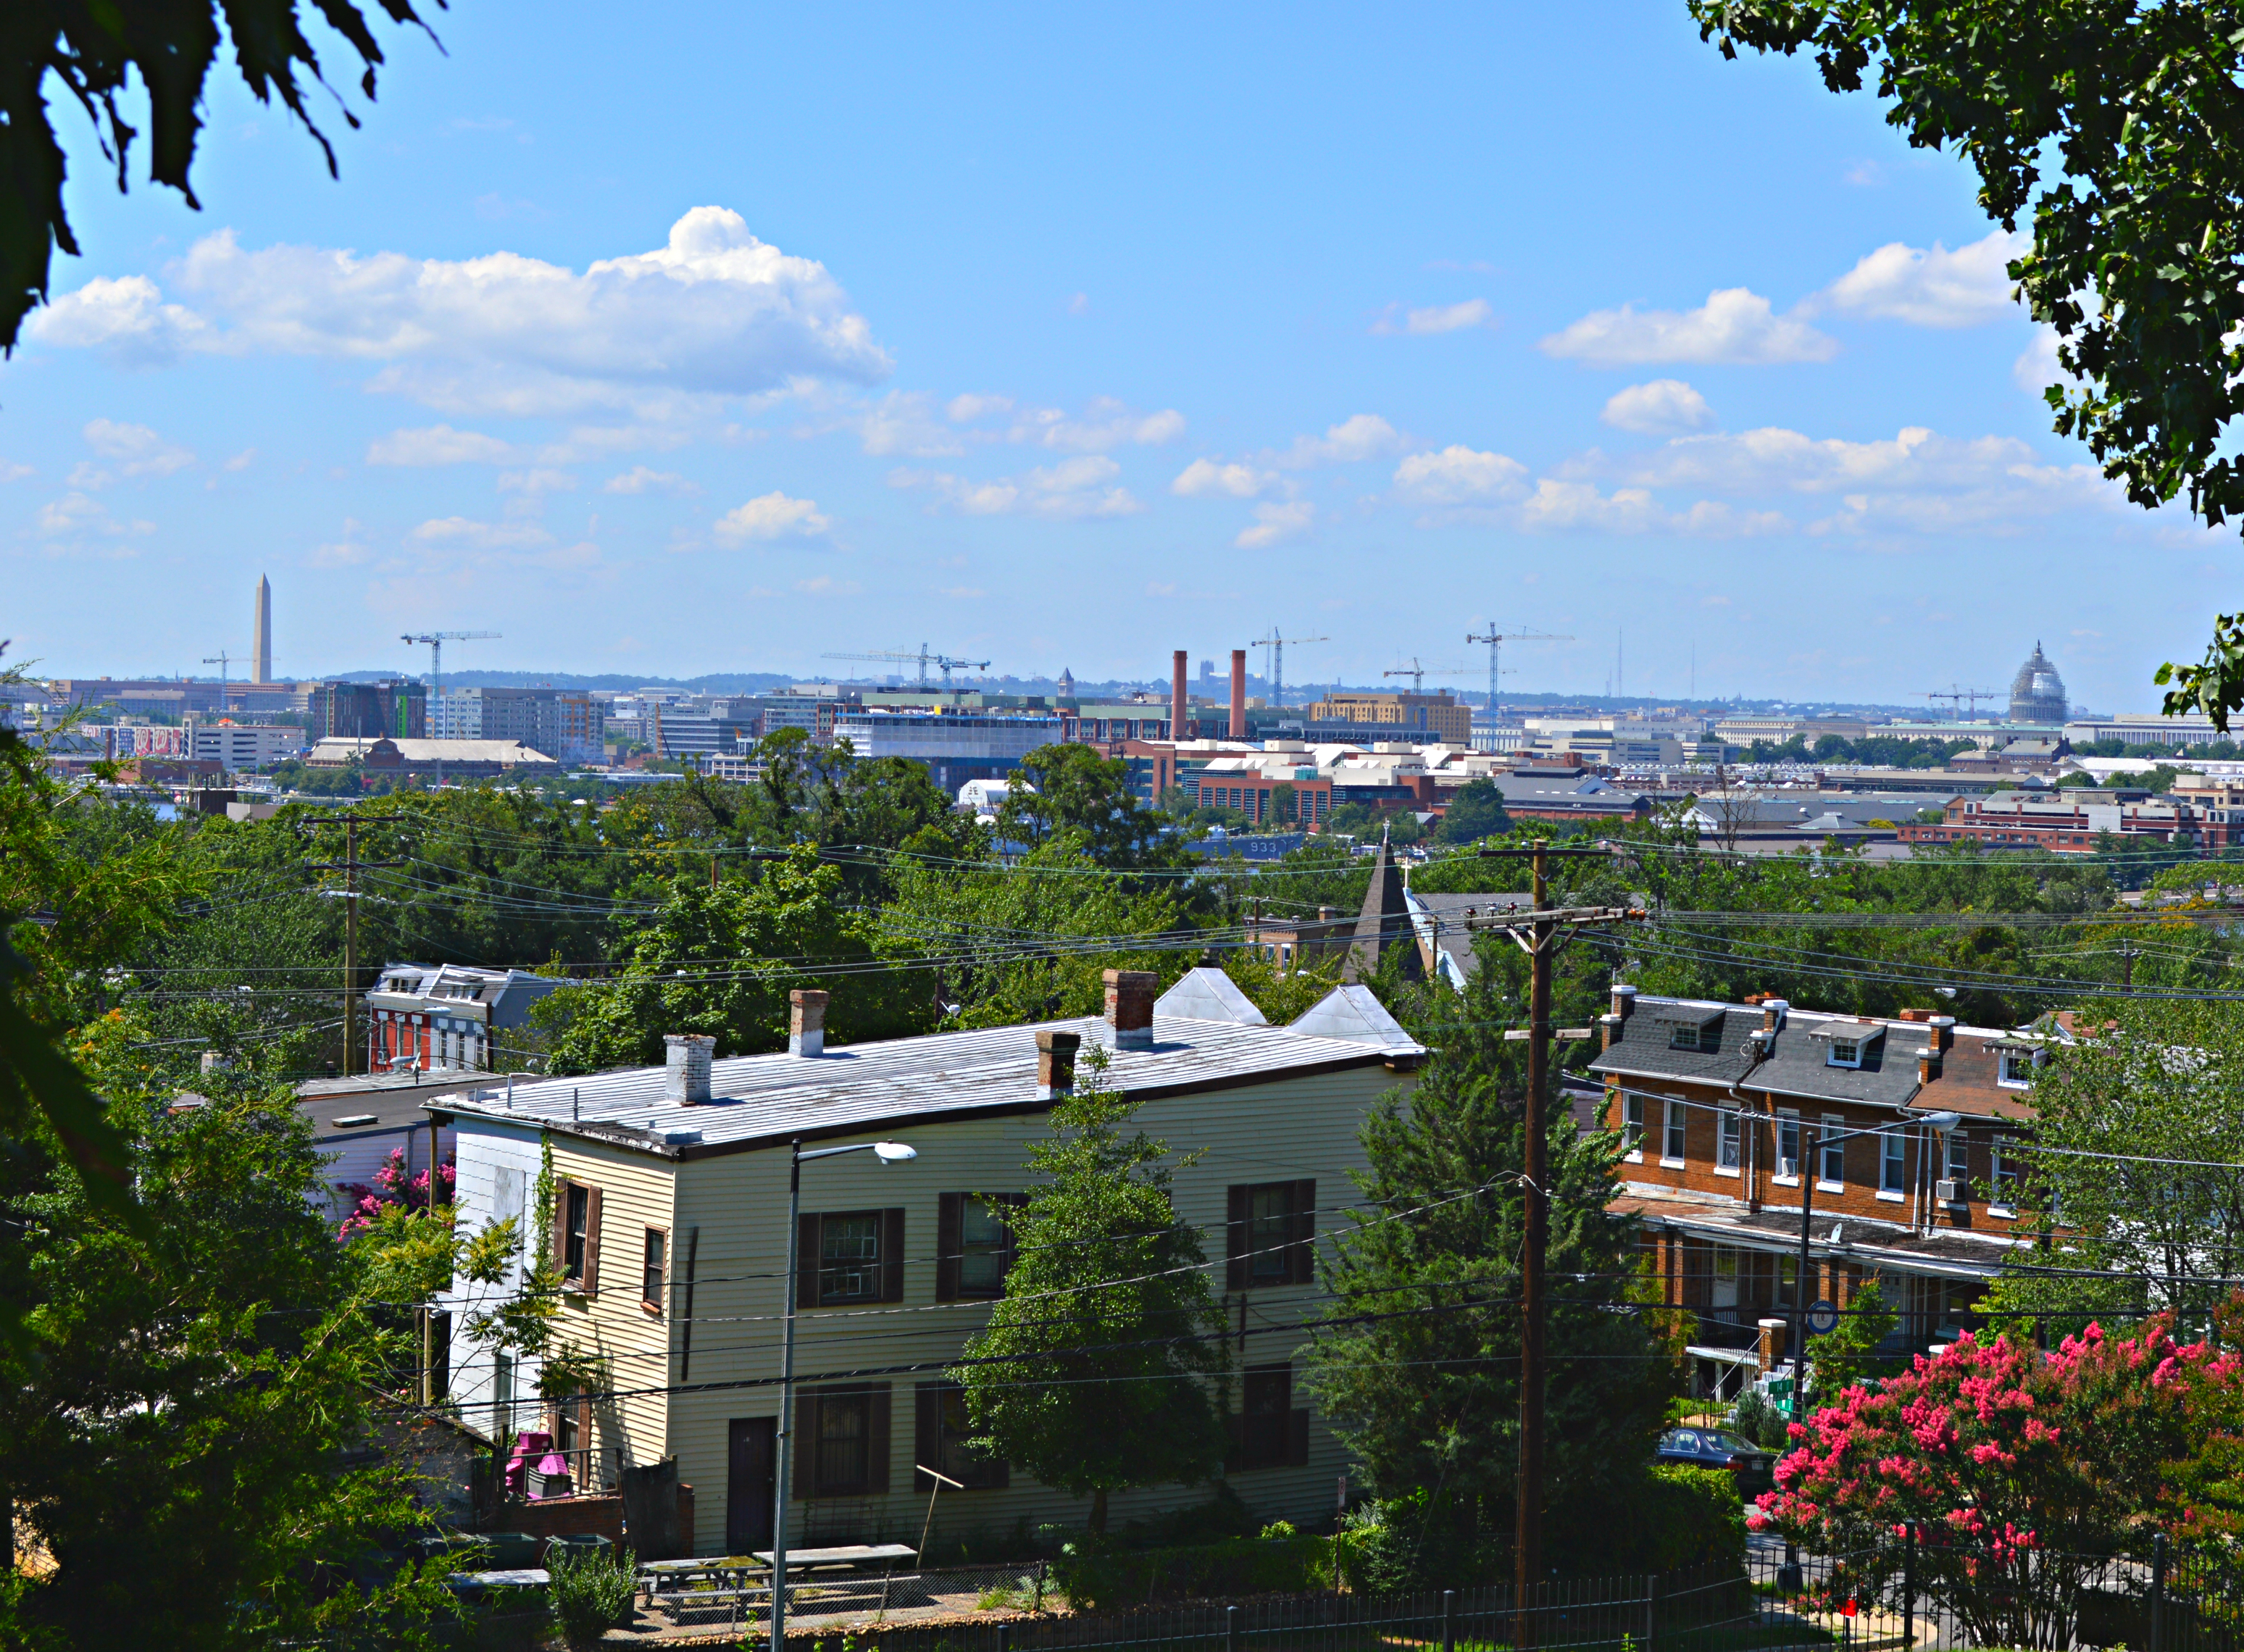 View of downtown Washington, D.C., including the Washington Monument and U.S. Capitol